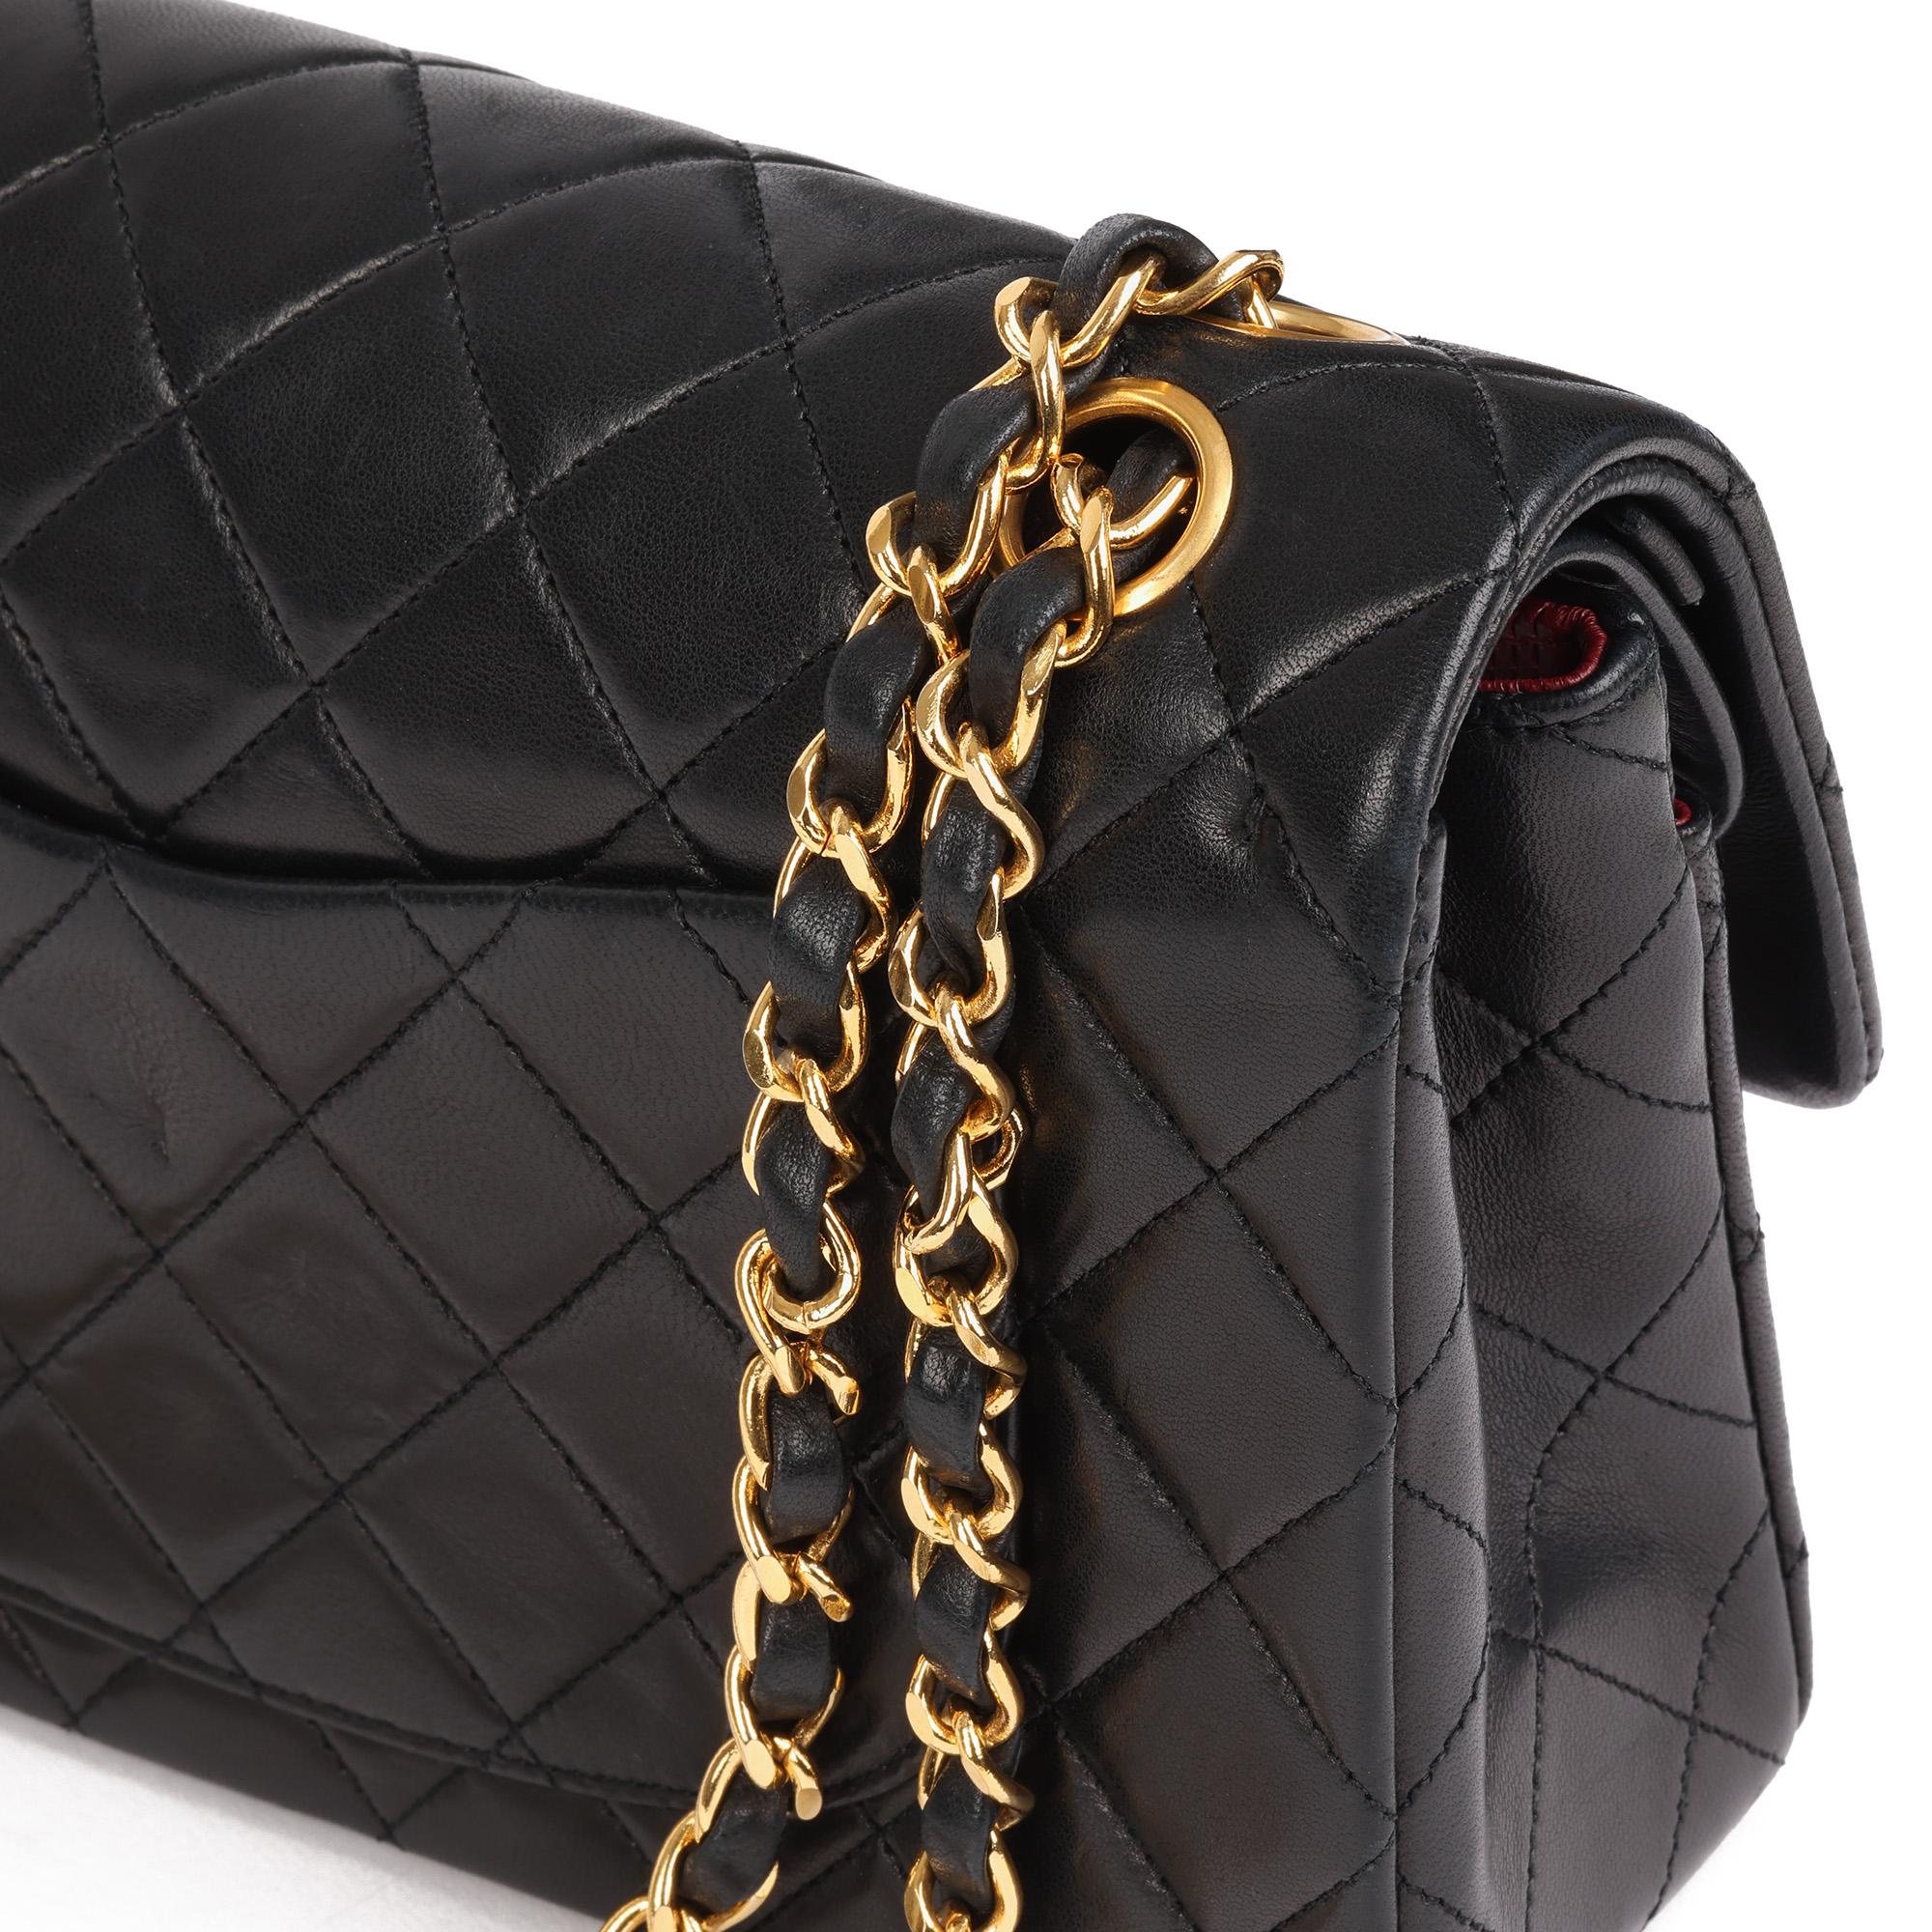 CHANEL
Black Quilted Lambskin Vintage Small Classic Double Flap Bag 

Xupes Reference: HB4030
Serial Number: 1409902
Age (Circa): 1991
Accompanied By: Chanel Dust Bag, Authenticity Card
Authenticity Details: Authenticity Card, Serial Sticker (Made